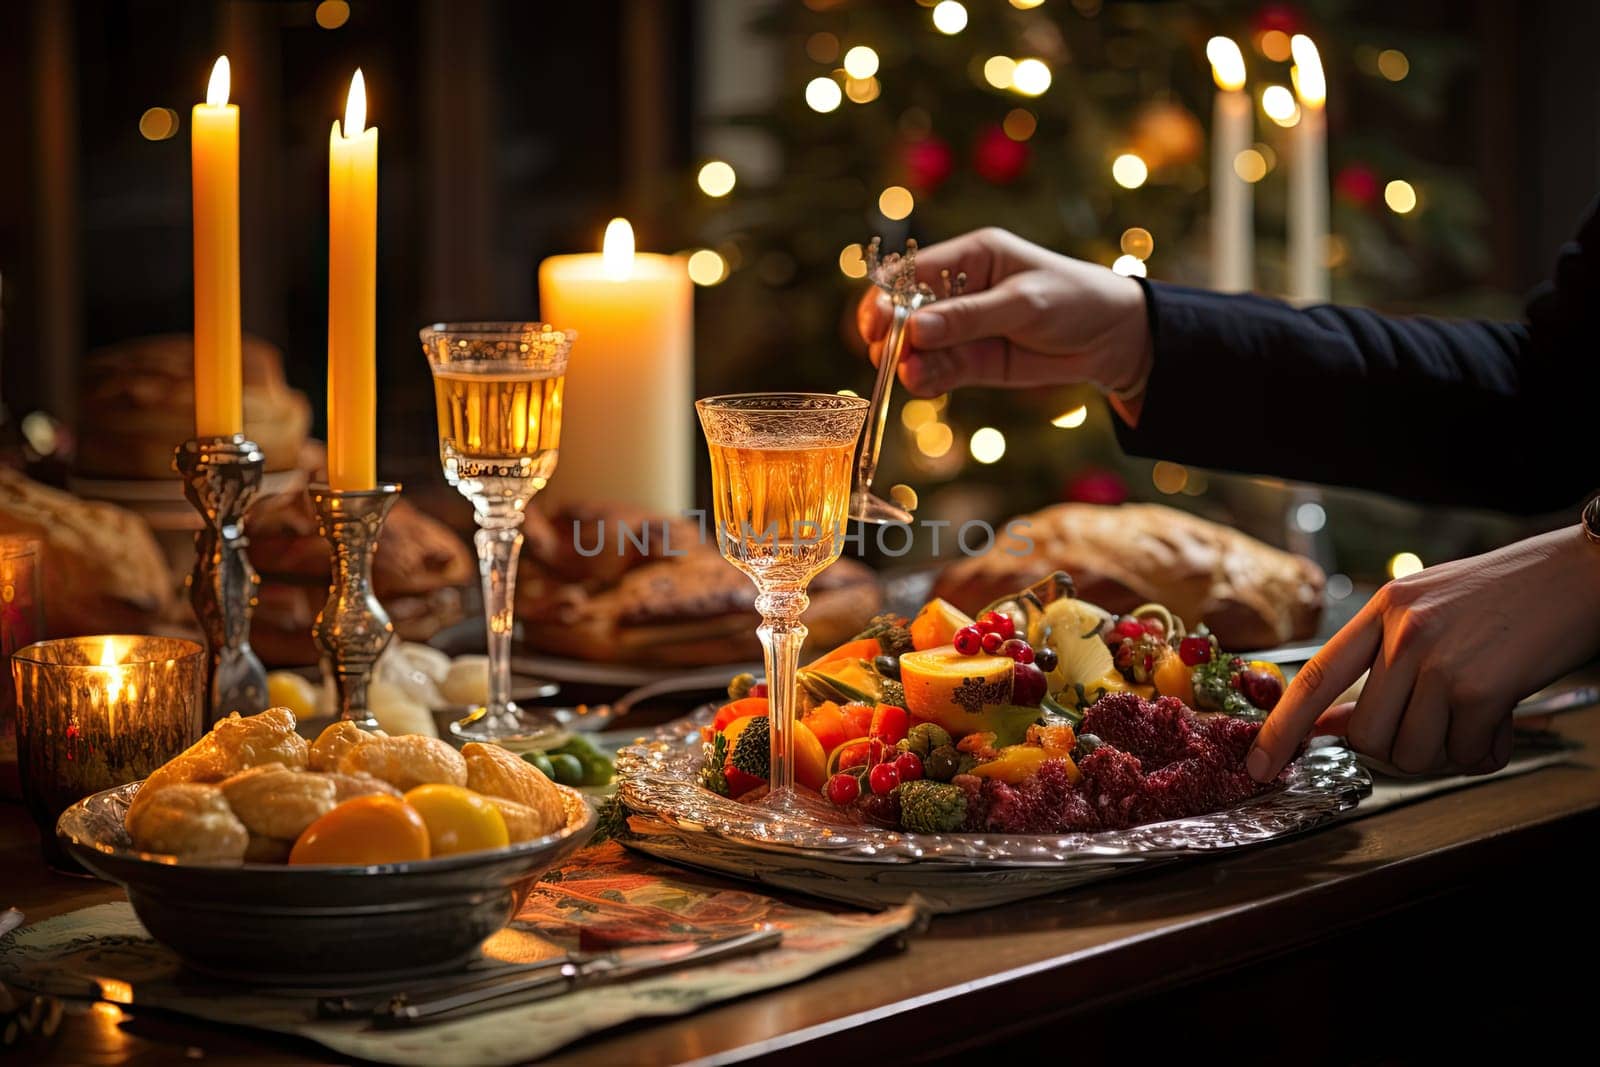 A table full of food and candles with a christmas tree in the background by golibtolibov